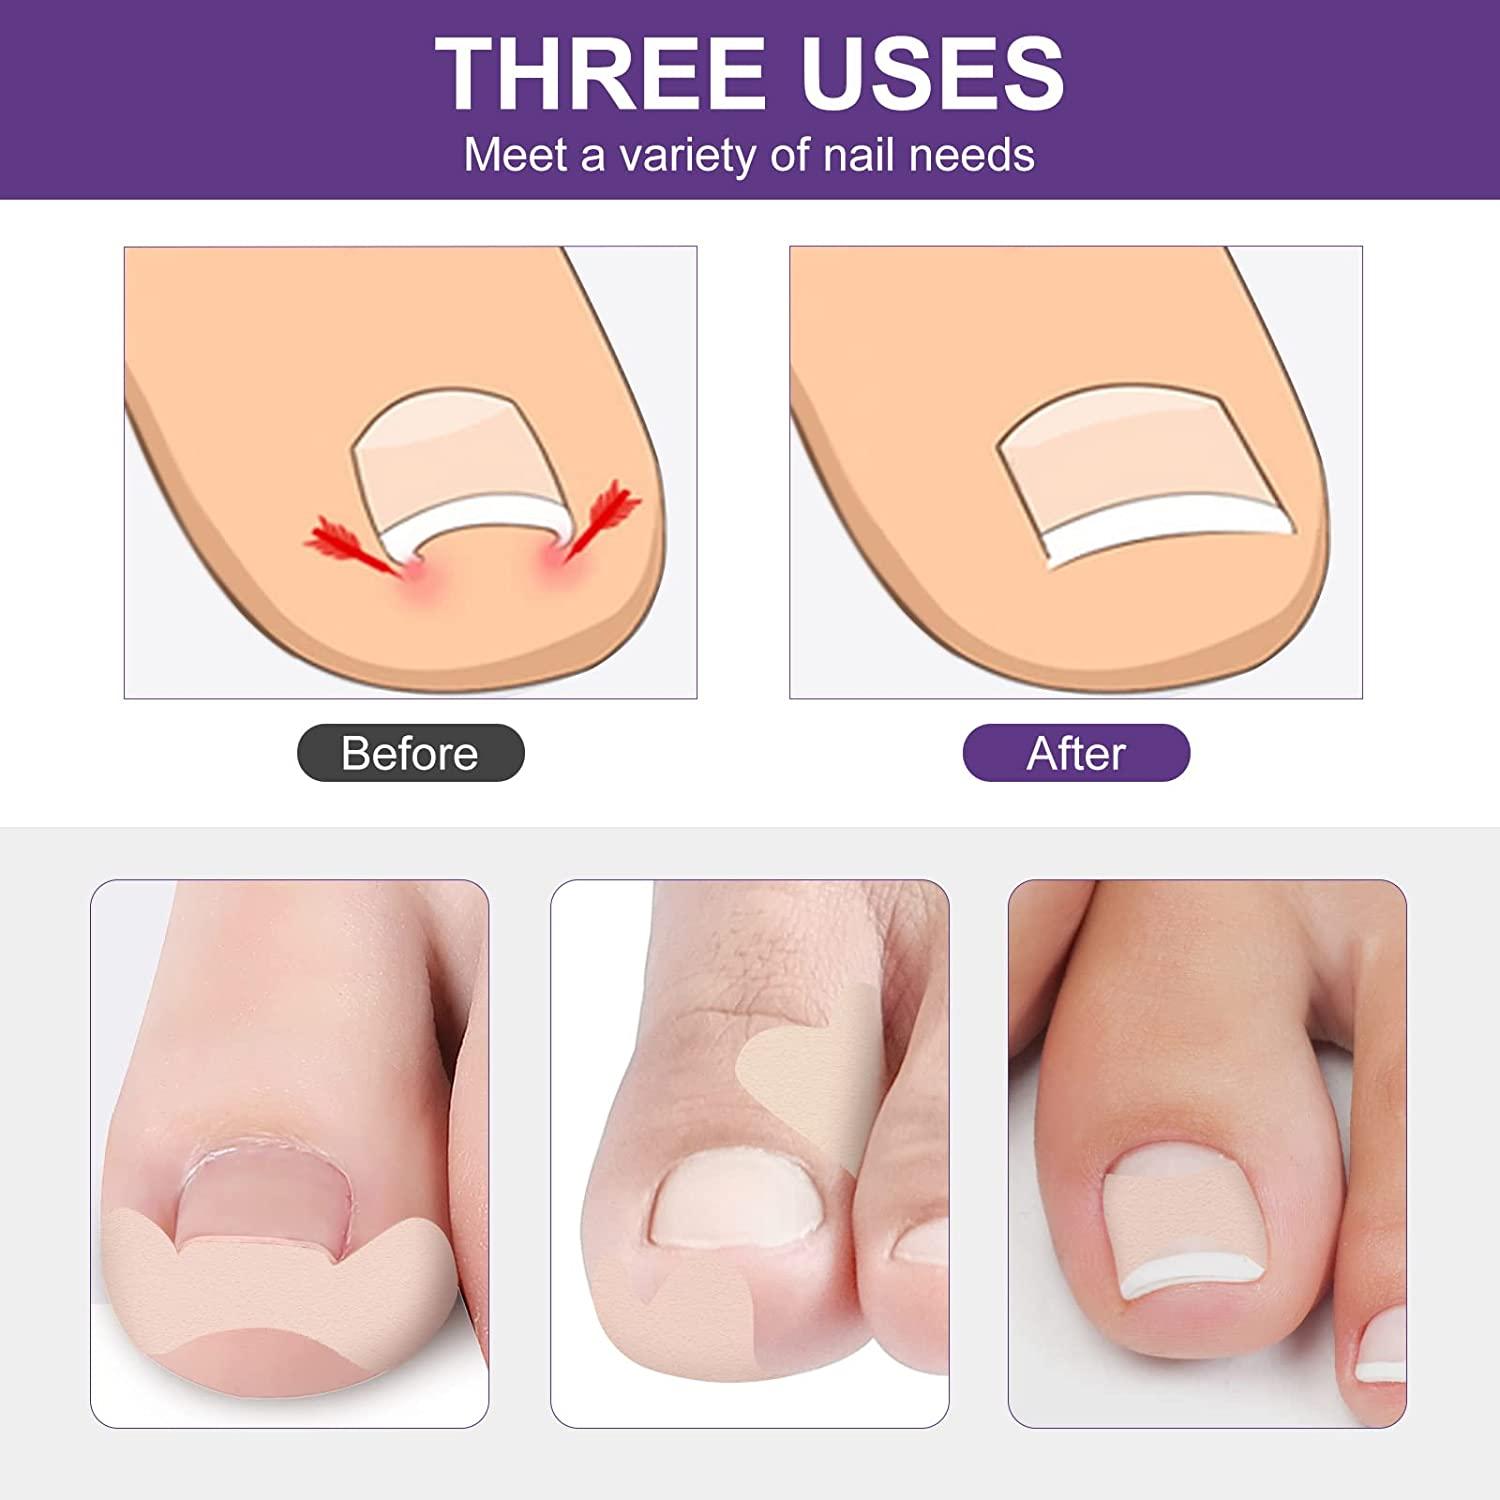 7 Common Causes of Big Toe Pain